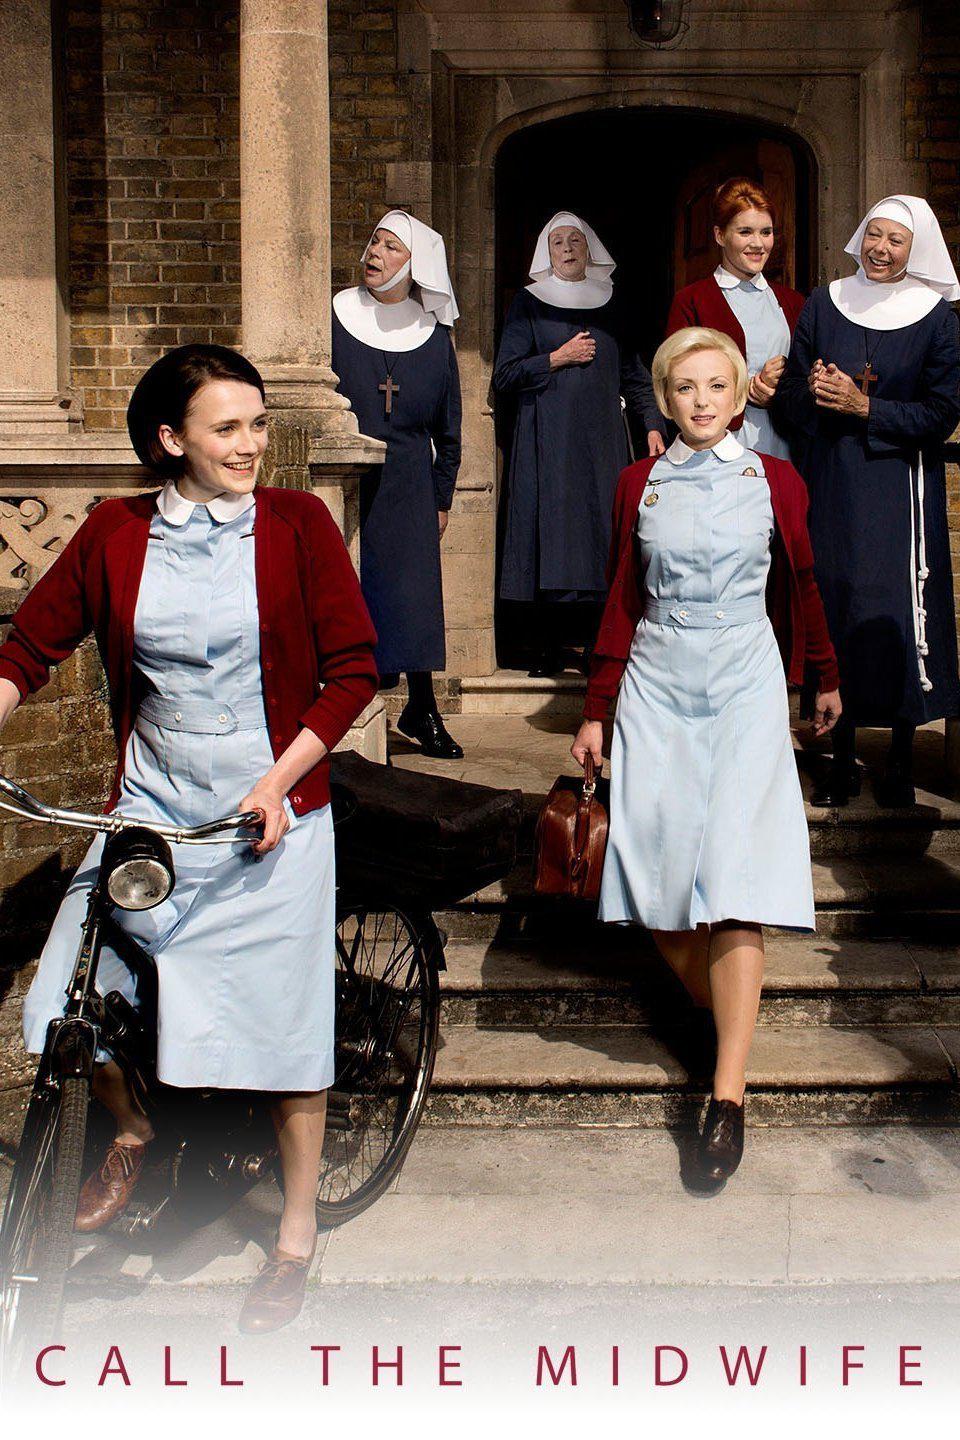 TV ratings for Call The Midwife in Noruega. BBC One TV series